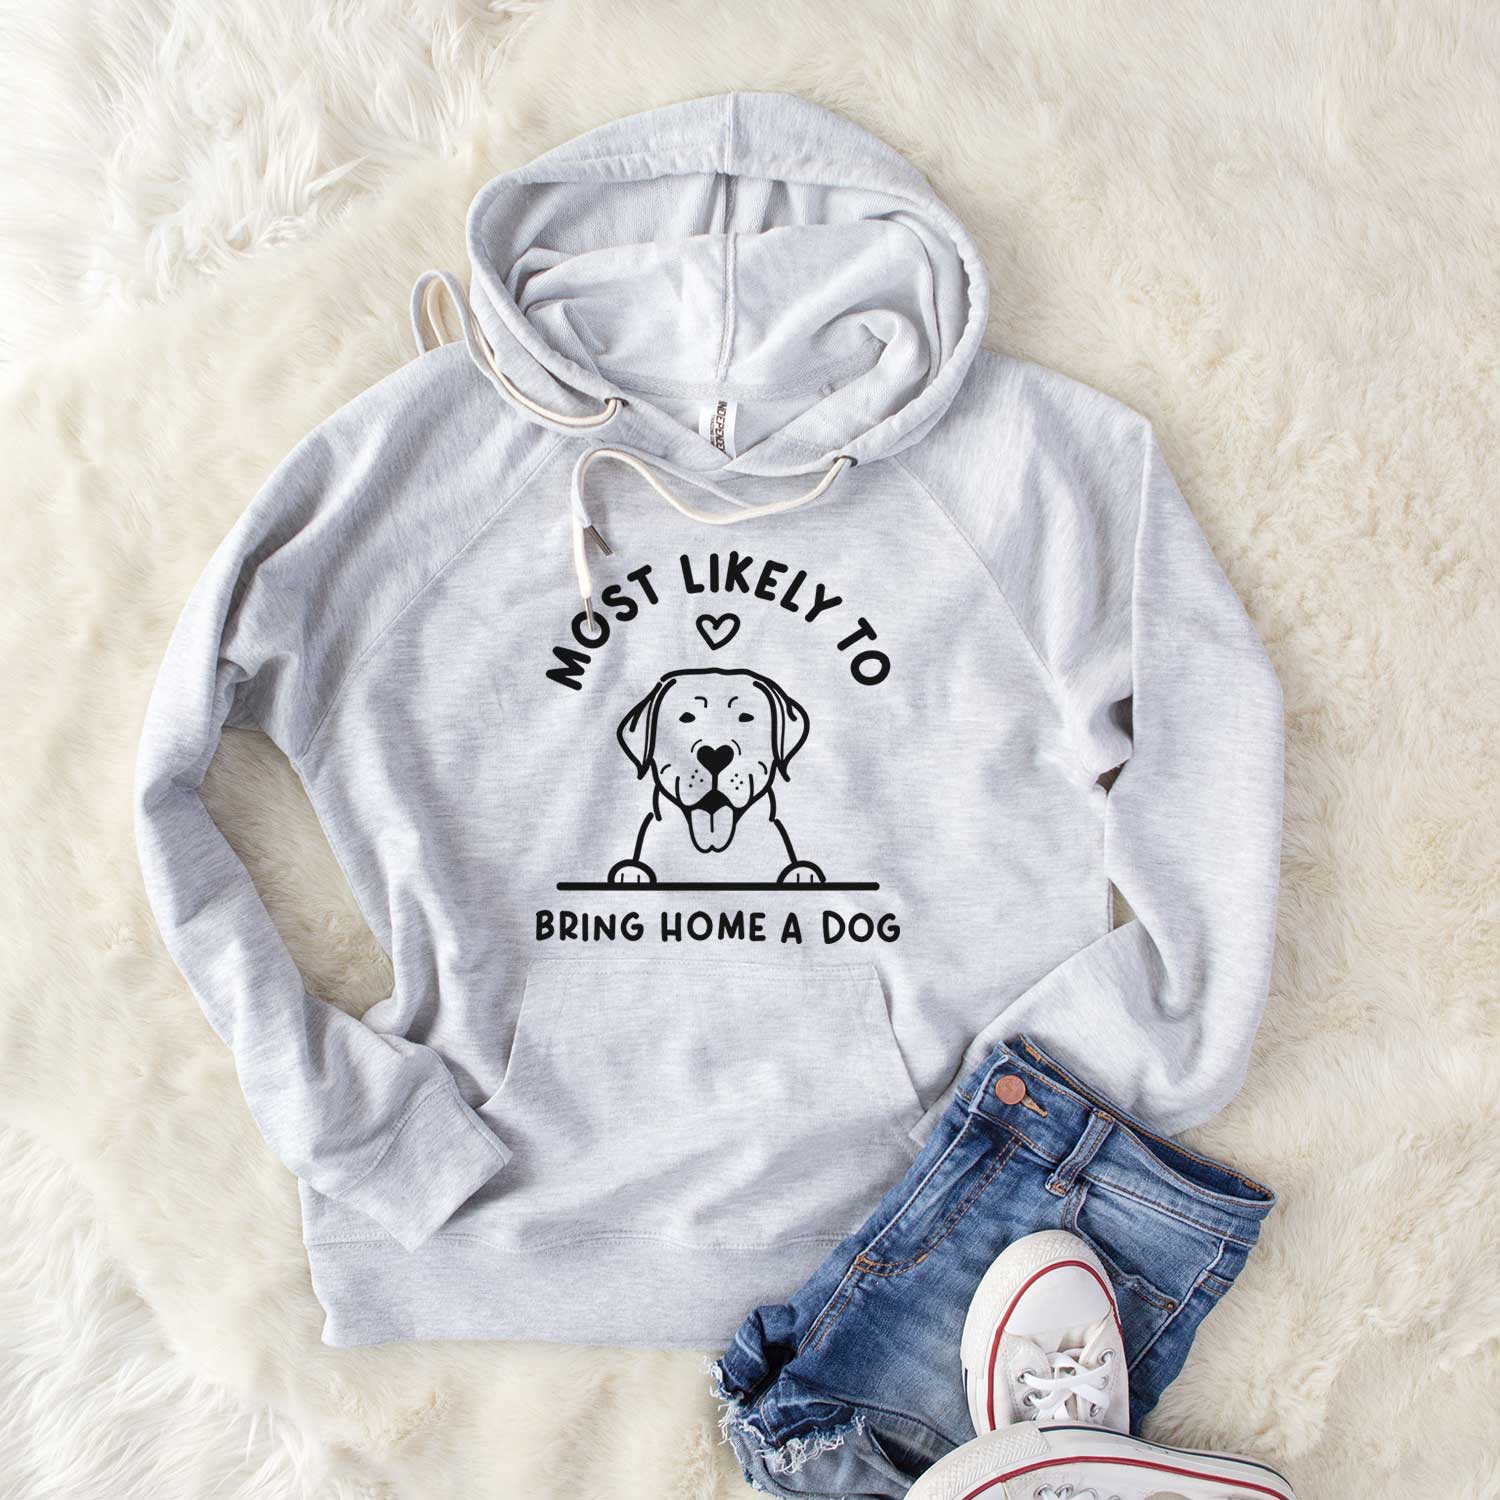 Most Likely to Bring Home a Dog - Labrador Retriever - Unisex Loopback Terry Hoodie